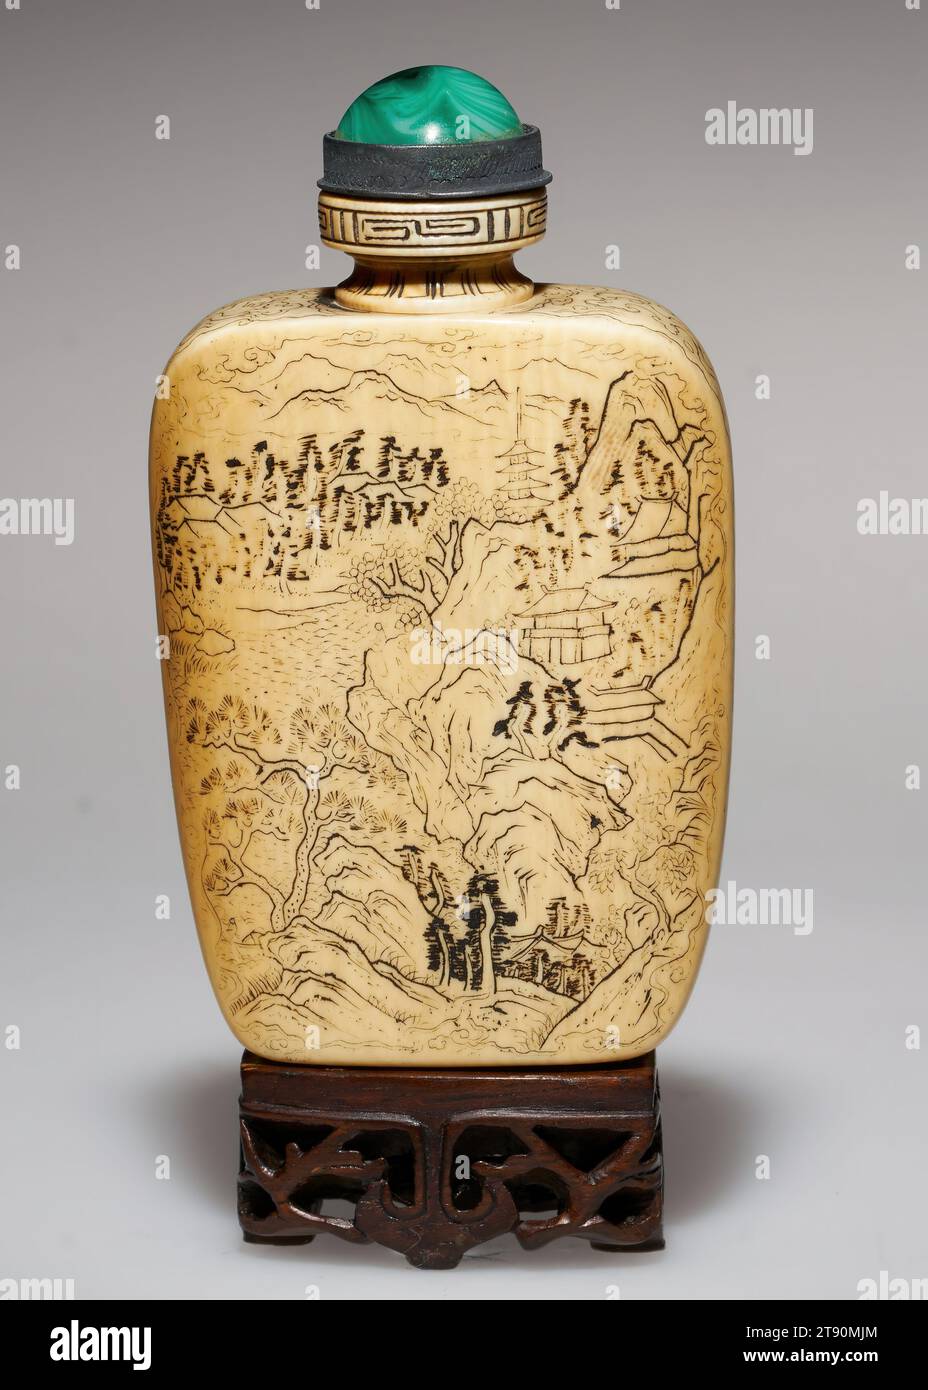 Snuff Bottle, 1875-1925, 3 1/2 x 2in. (8.9 x 5.1cm), Ivory, glass, silver, China, Carved from ivory, this bottle was then etched with a rocky, mountainous scene scattered with trees and tiny temples. A river flows in the background. The artist seems to have mimicked the spontaneous style of ink landscapes, using brushstroke-like lines to render the leaves on the trees and the outlines of the mountains Stock Photo